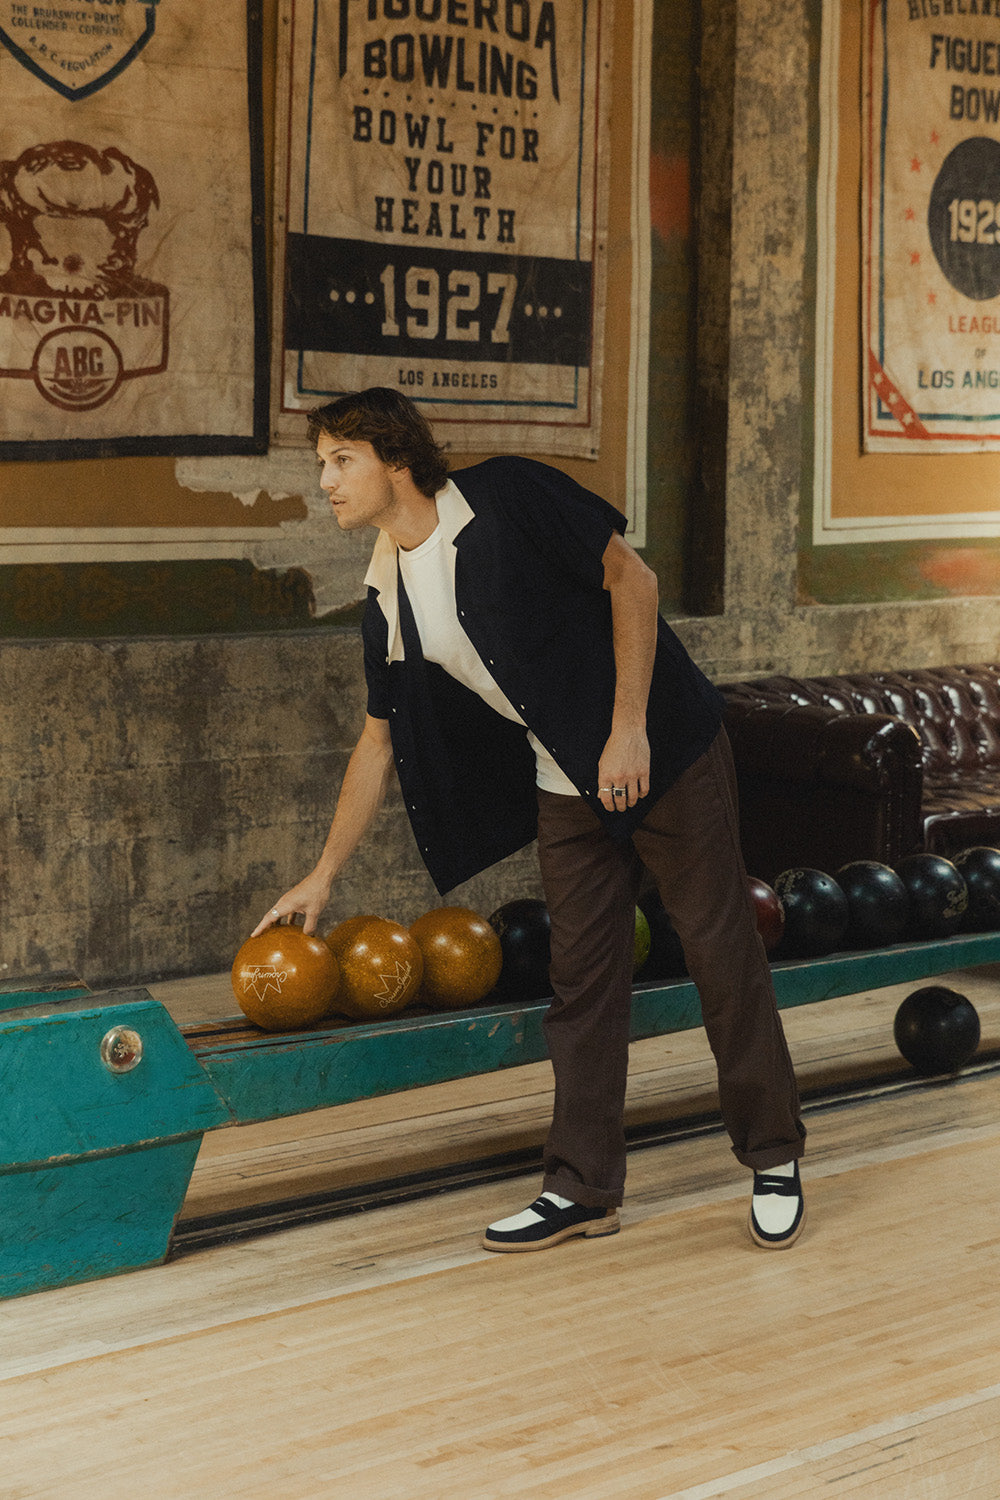 A man in a navy shirt and brown pants reaches for a bowling ball.